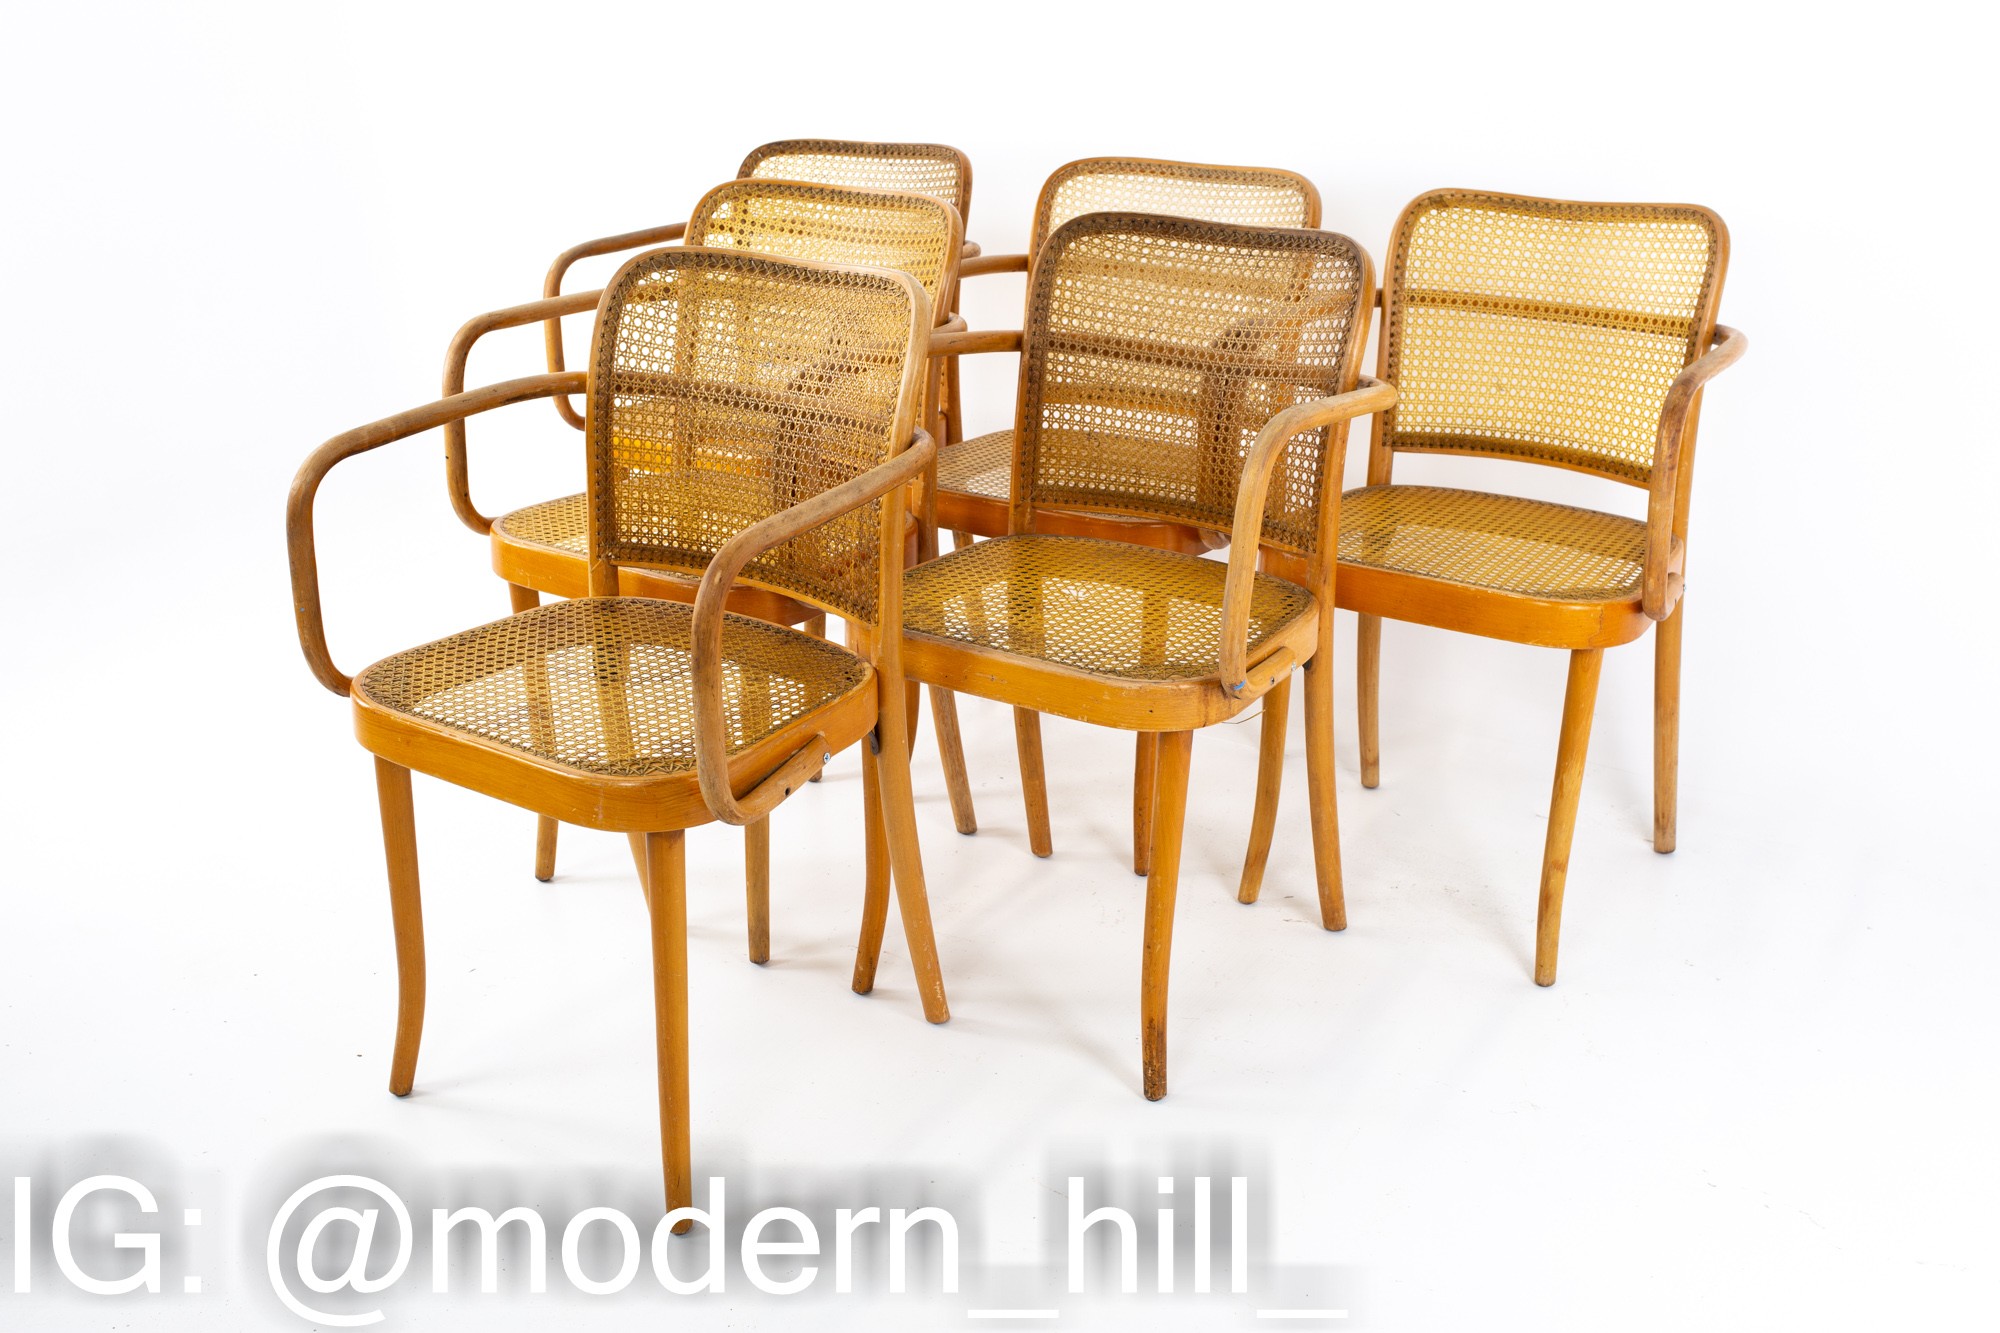 Salvatore Leone Thonet Style Mid Century Bentwood and Cane Dining Chairs - Set of 6